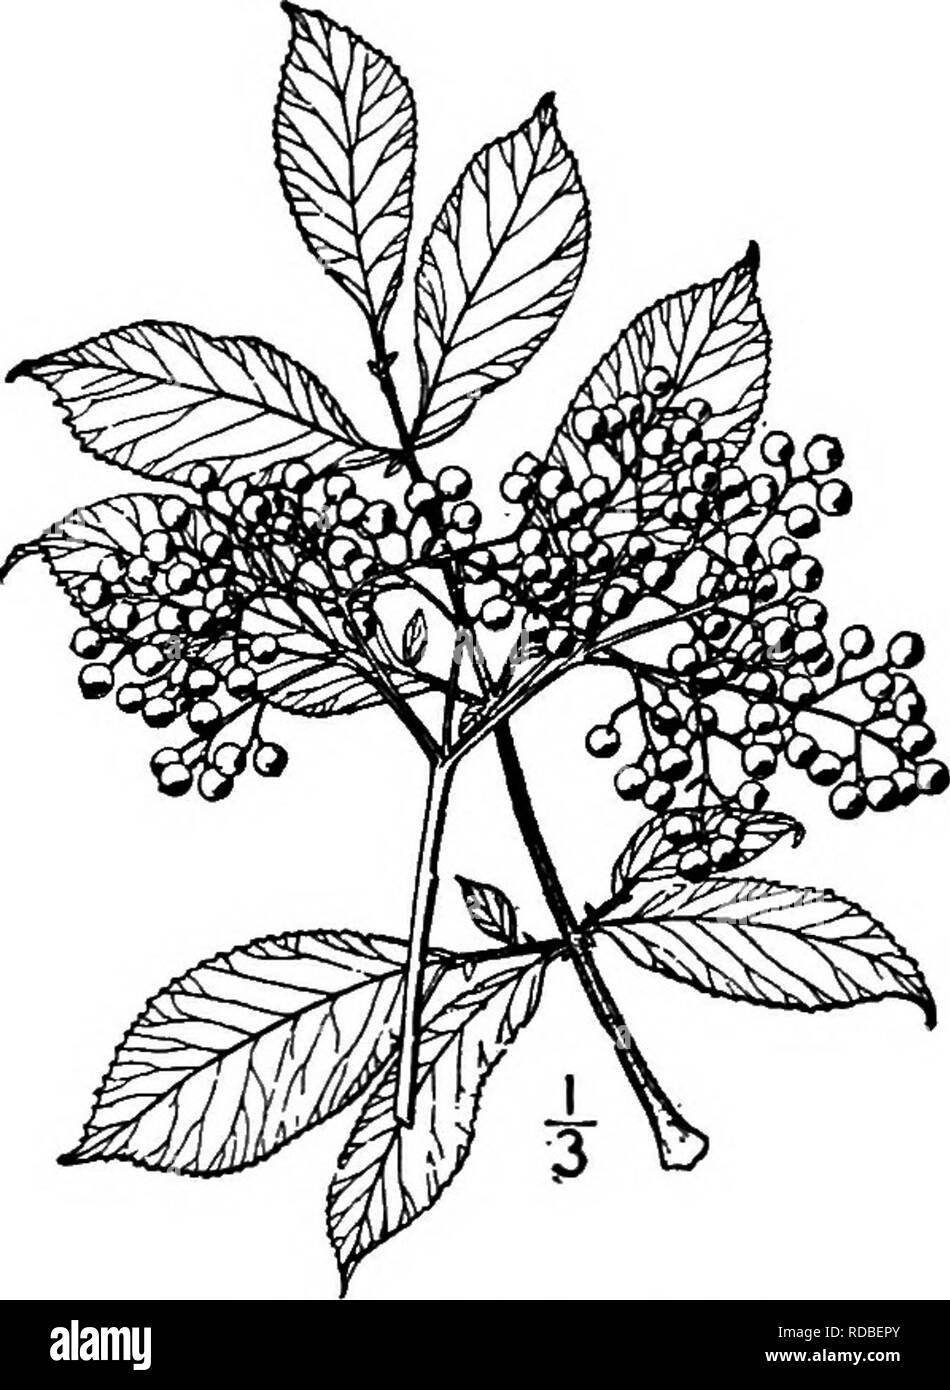 . North American trees : being descriptions and illustrations of the trees growing independently of cultivation in North America, north of Mexico and the West Indies . Trees. California Tree Elder. 2. CALIFORNIA TREE ELDER — Sambncus callicarpa Greene This tree, known only from California, where it is quite widely distributed in the Coast Mountains, reaches a maximum height of 8 meters, with a trunk diameter of 3 dm.; it probably extends northward into Oregon, and is often a mere shrub. The Ught brown bark is slightly fis- sured. The young twigs are somewhat hairy, becoming Ught red-brown with Stock Photo